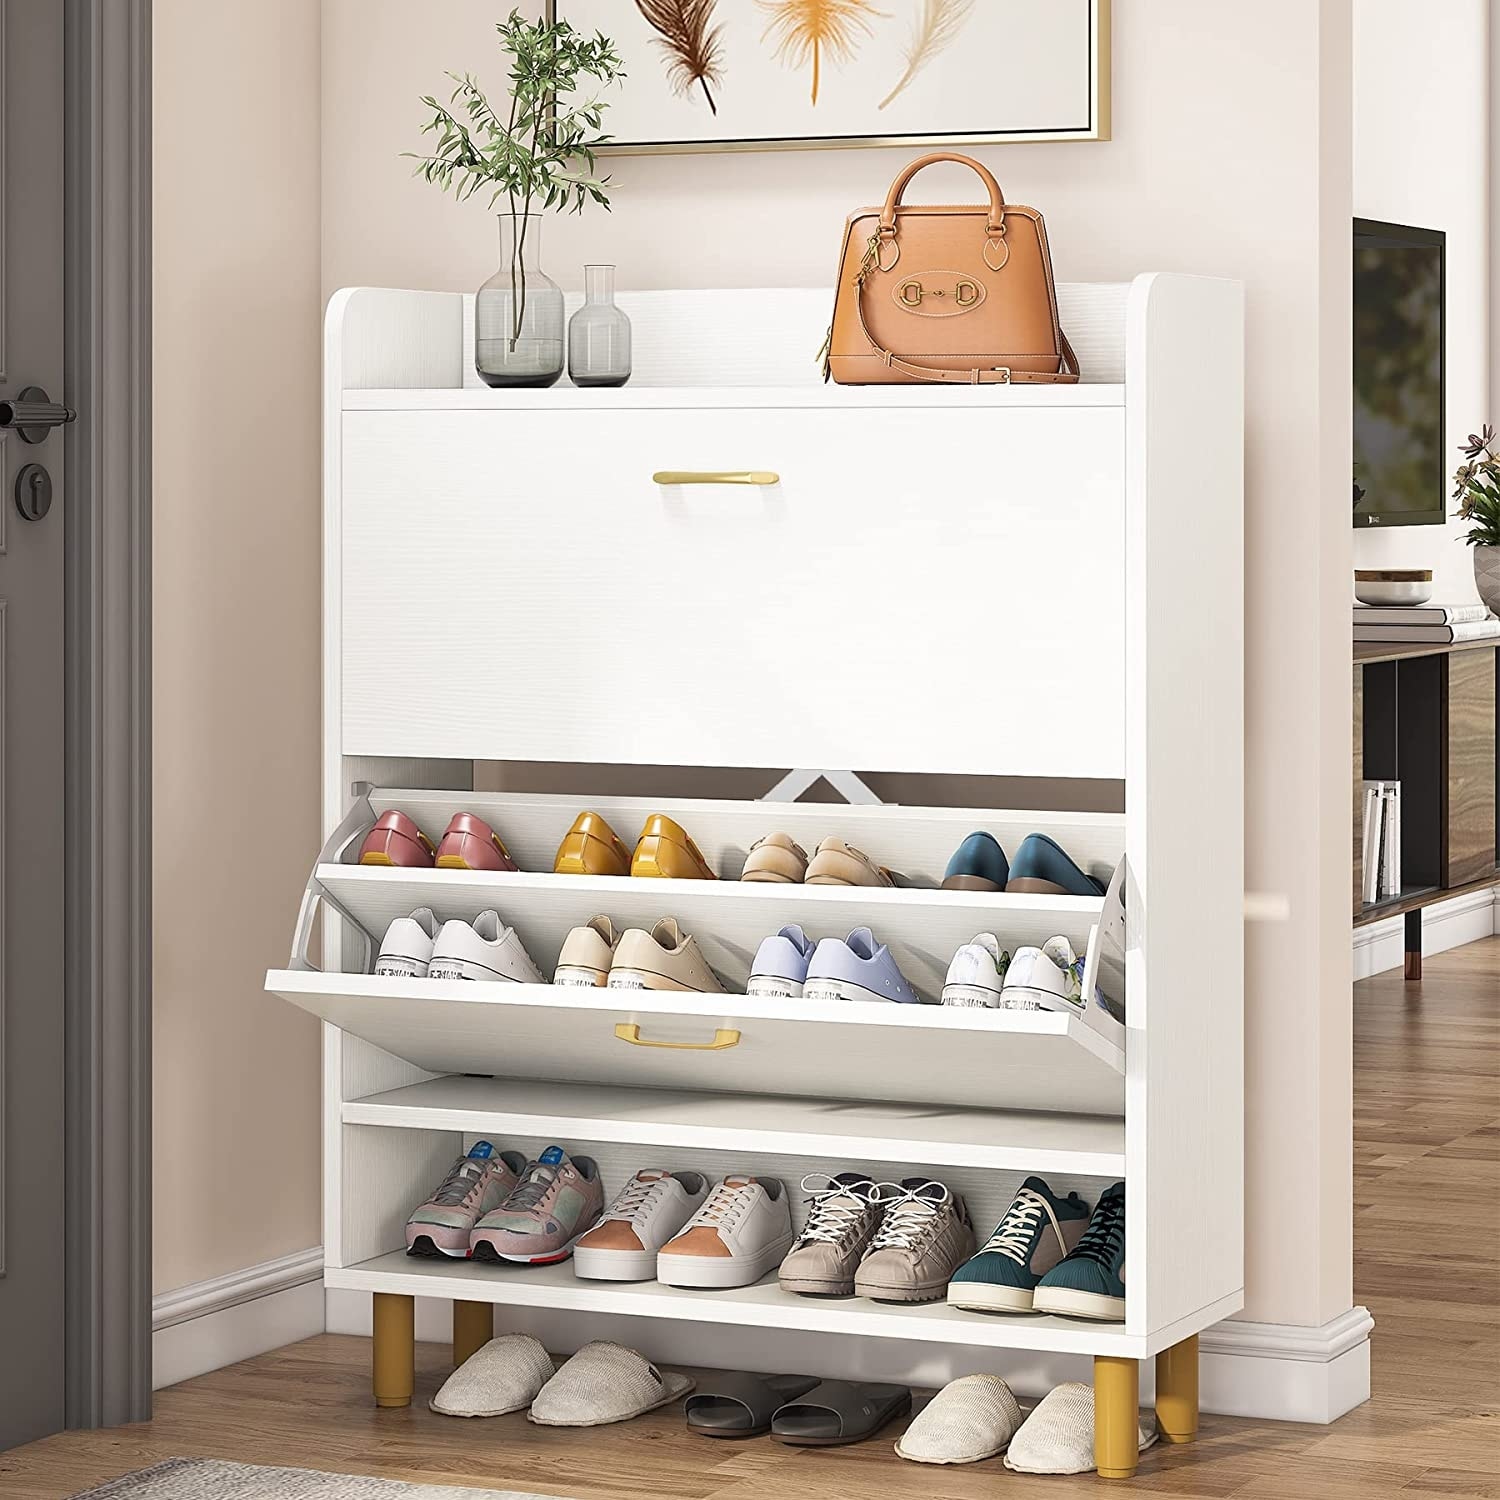 https://ak1.ostkcdn.com/images/products/is/images/direct/5cfea4f284d6e3c3e8cd3985e88eb57c53a8cbe2/Shoe-Storage-Cabinet%2C-24-Pair-Shoe-Storage-with-2-Drawers%2C-Brown-White.jpg